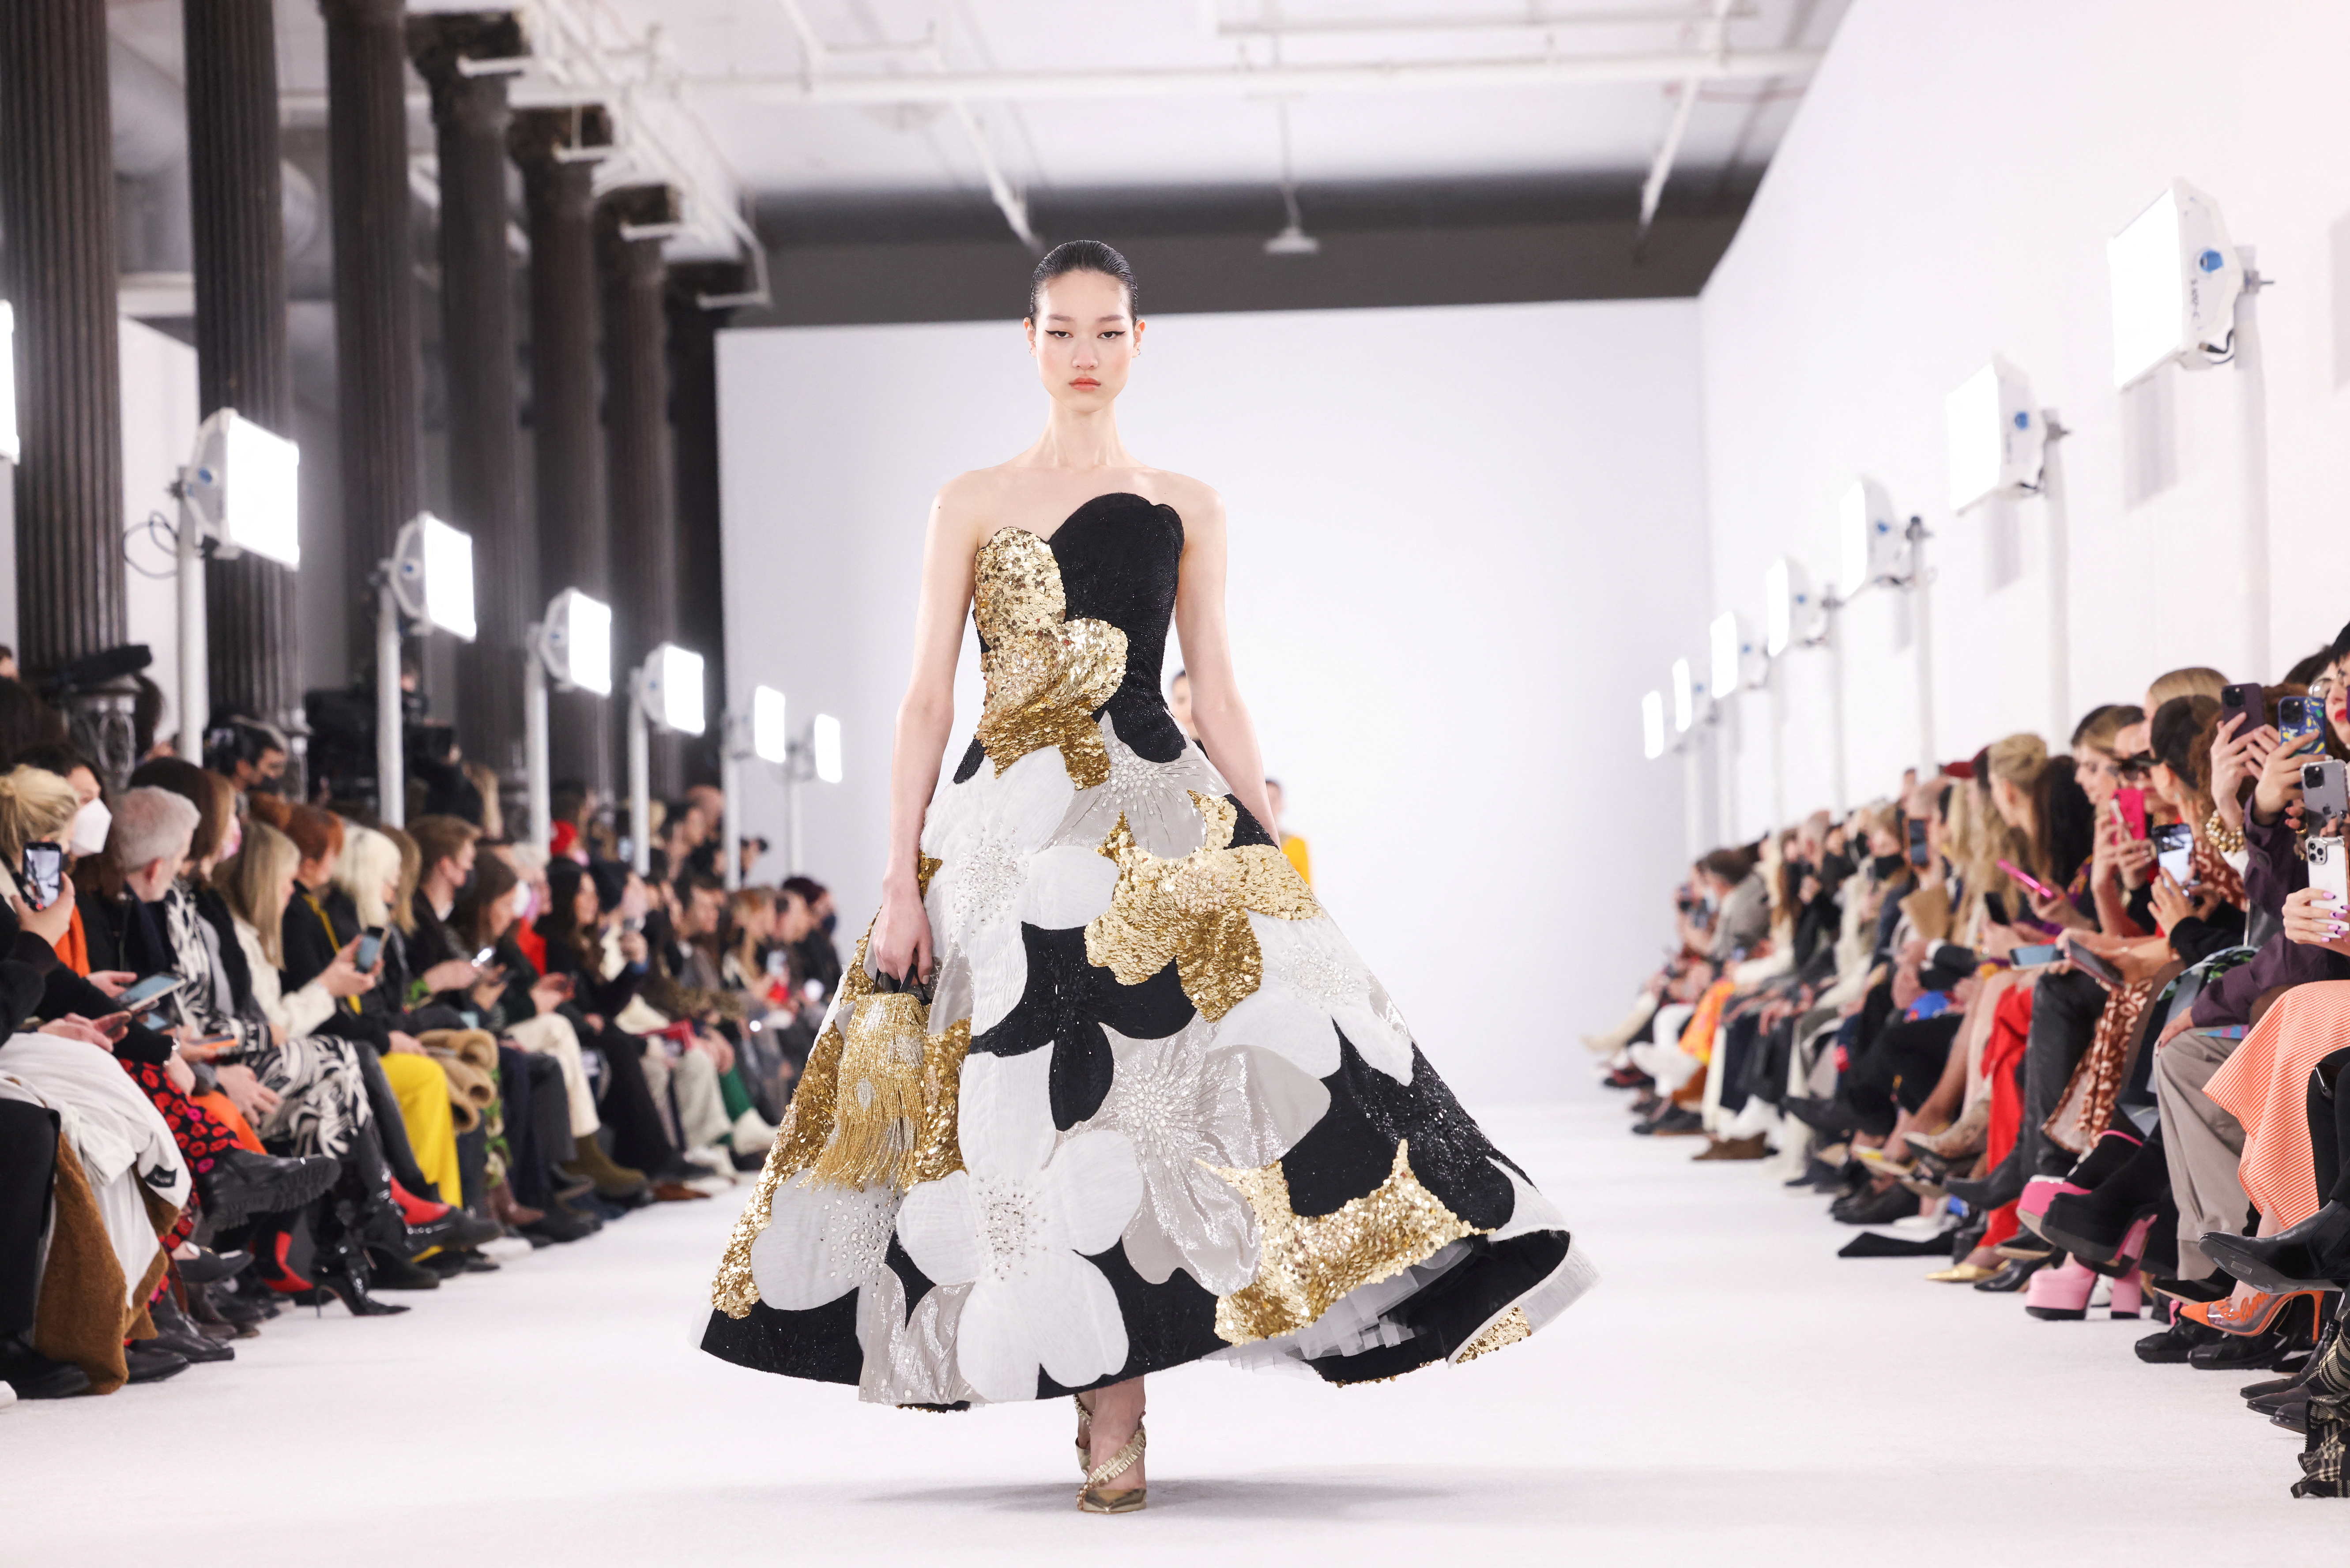 New York Fashion Week: The Designers, the Models, the Fashions of